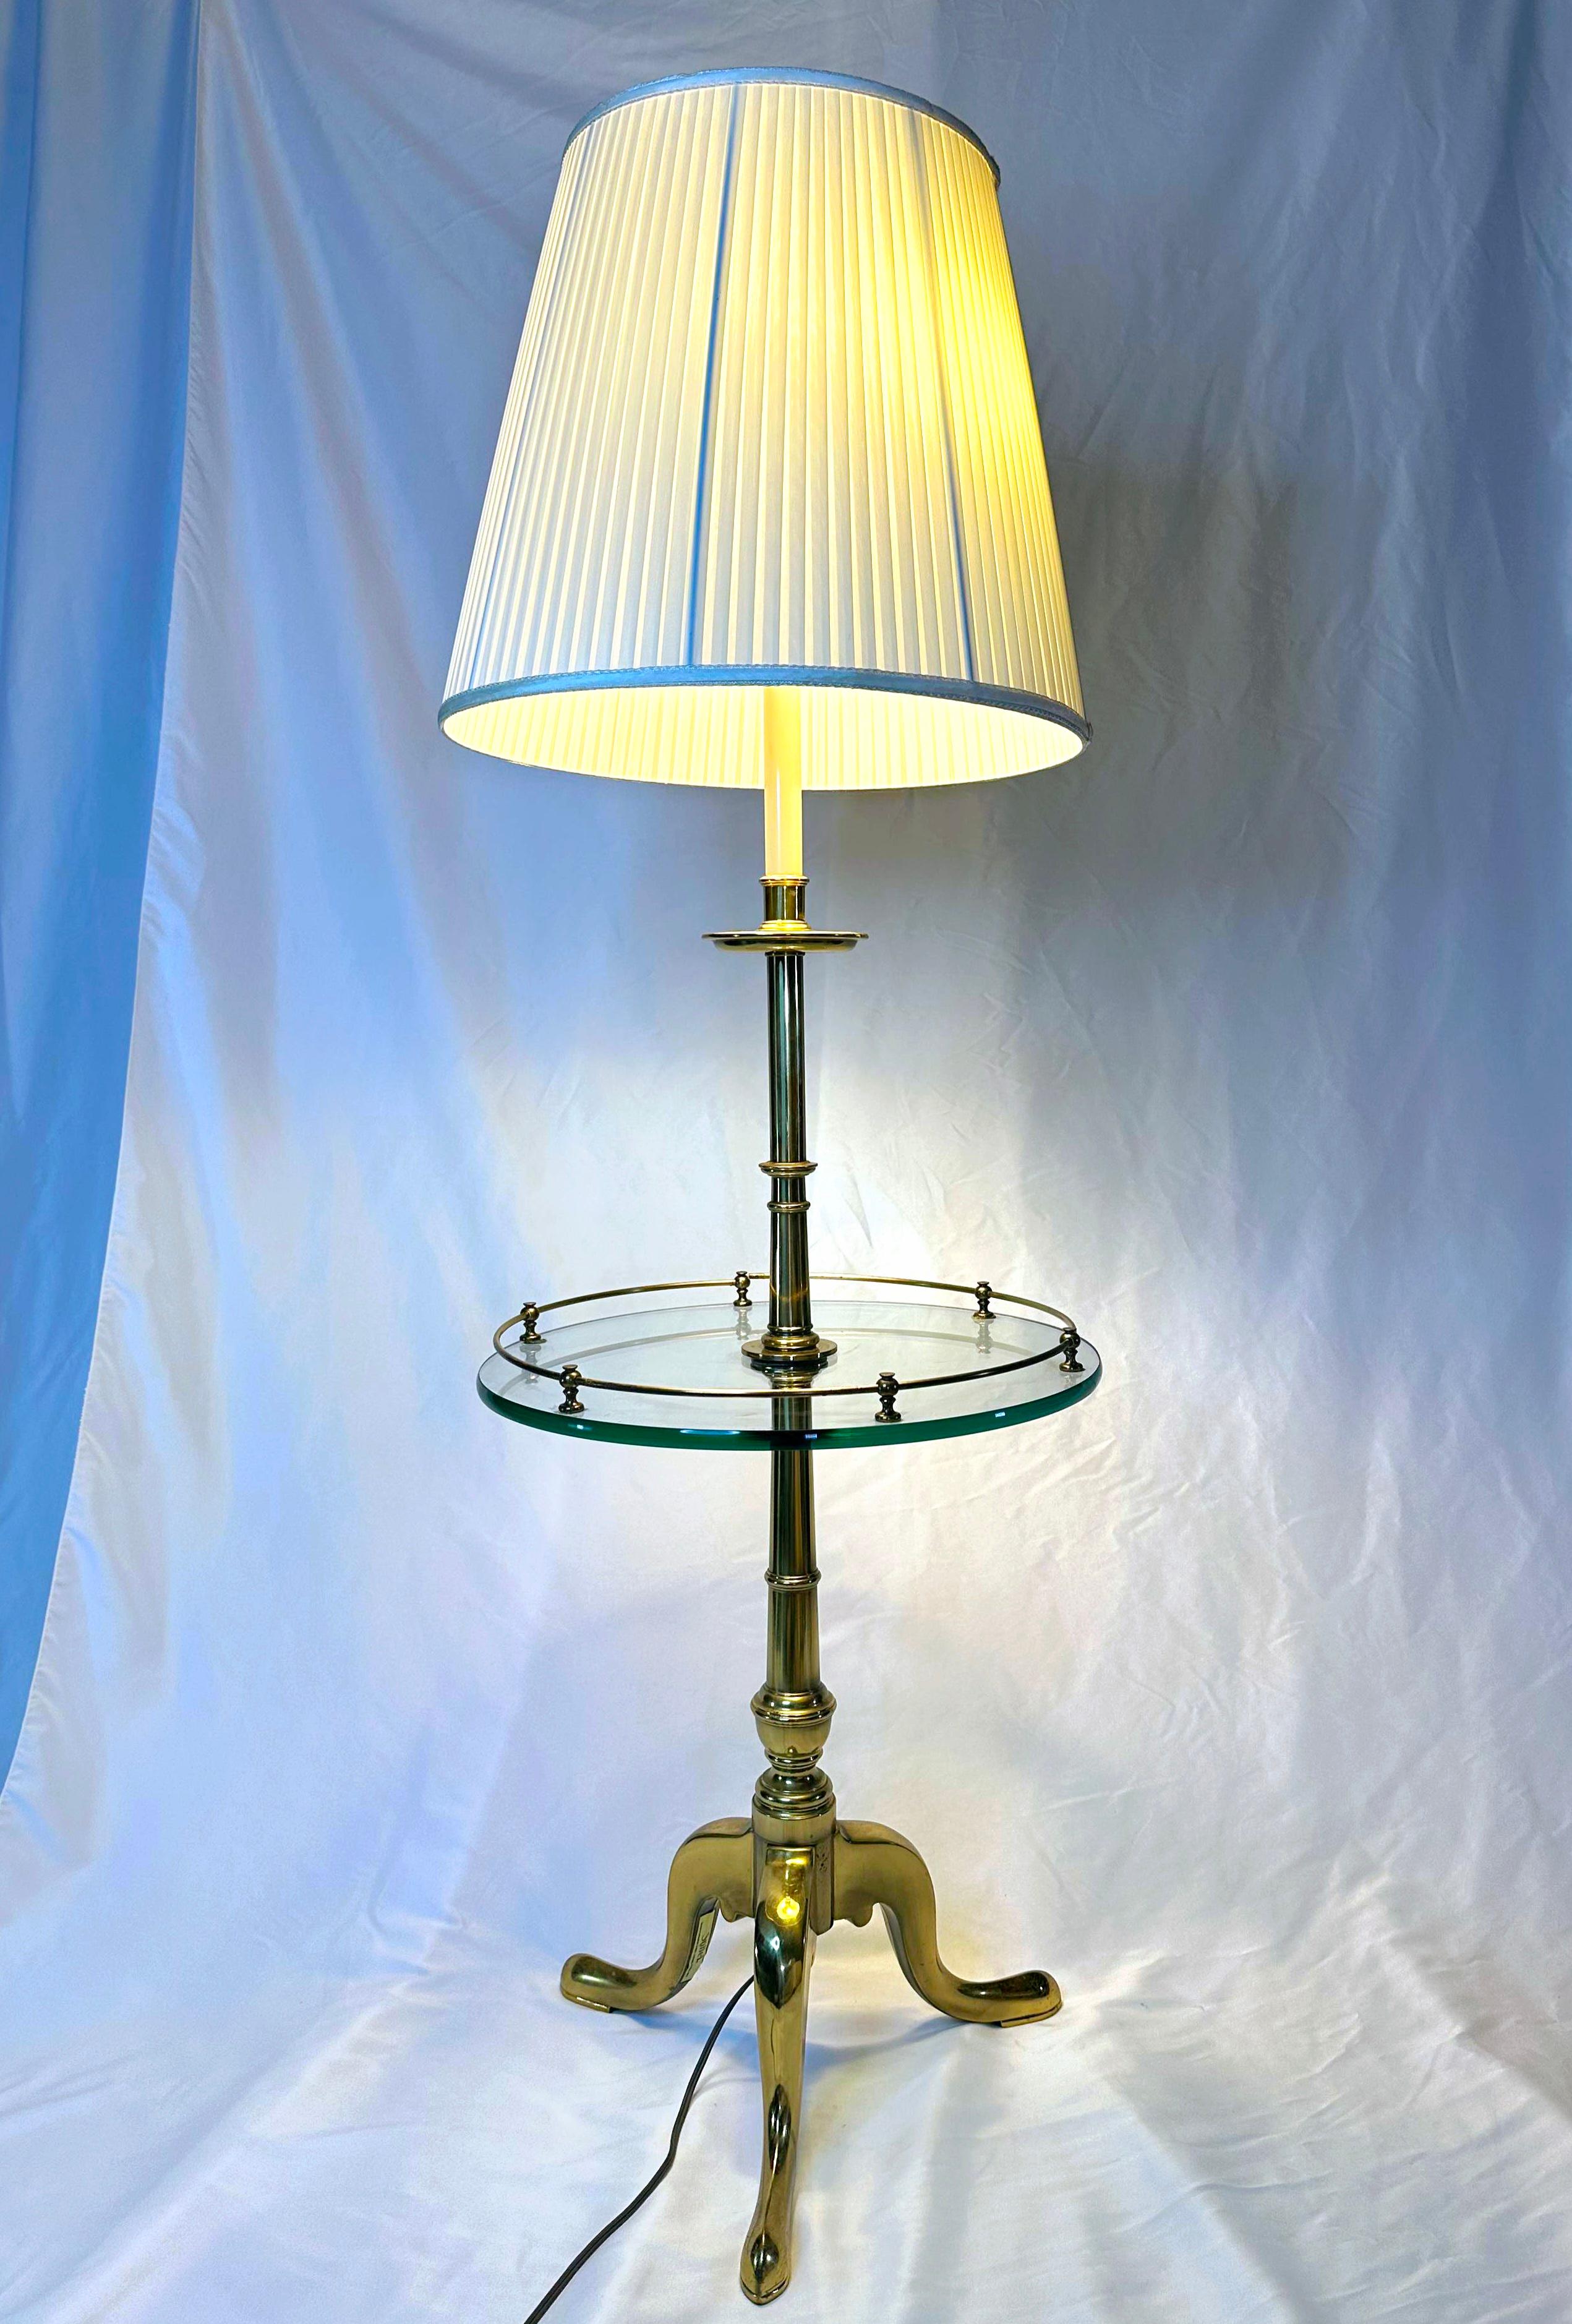 French Provincial Stiffel Floor Lamp With Glass Table and tripod legs For Sale 16